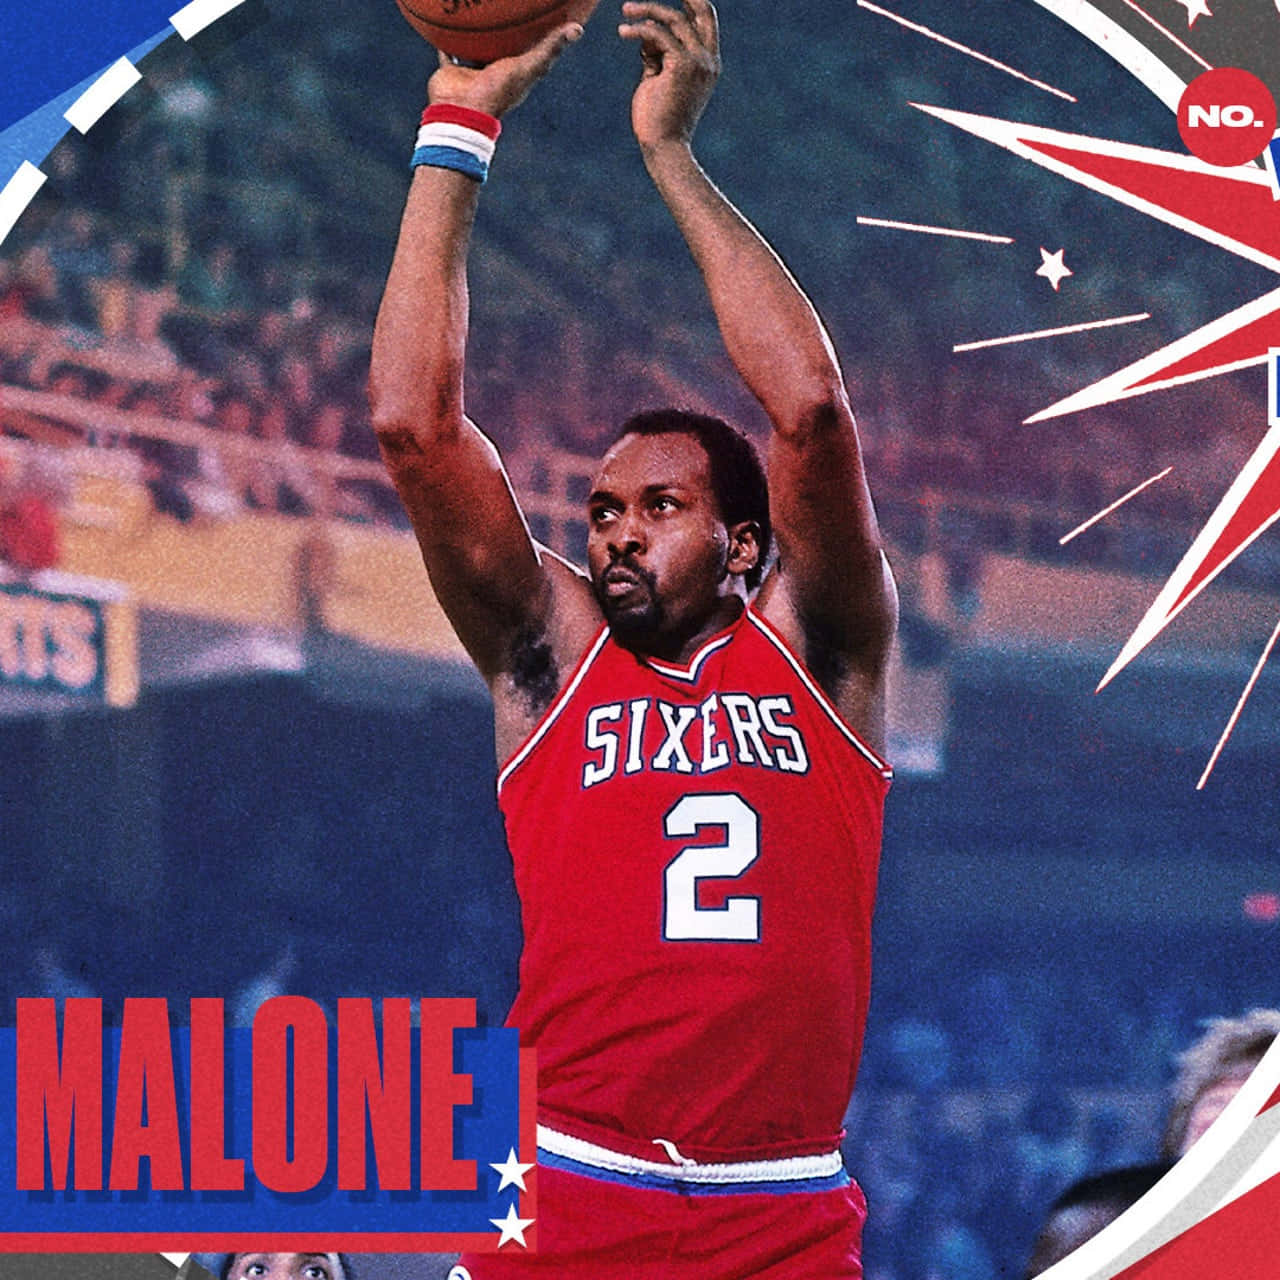 Sixers Number 2 Moses Malone Wallpaper